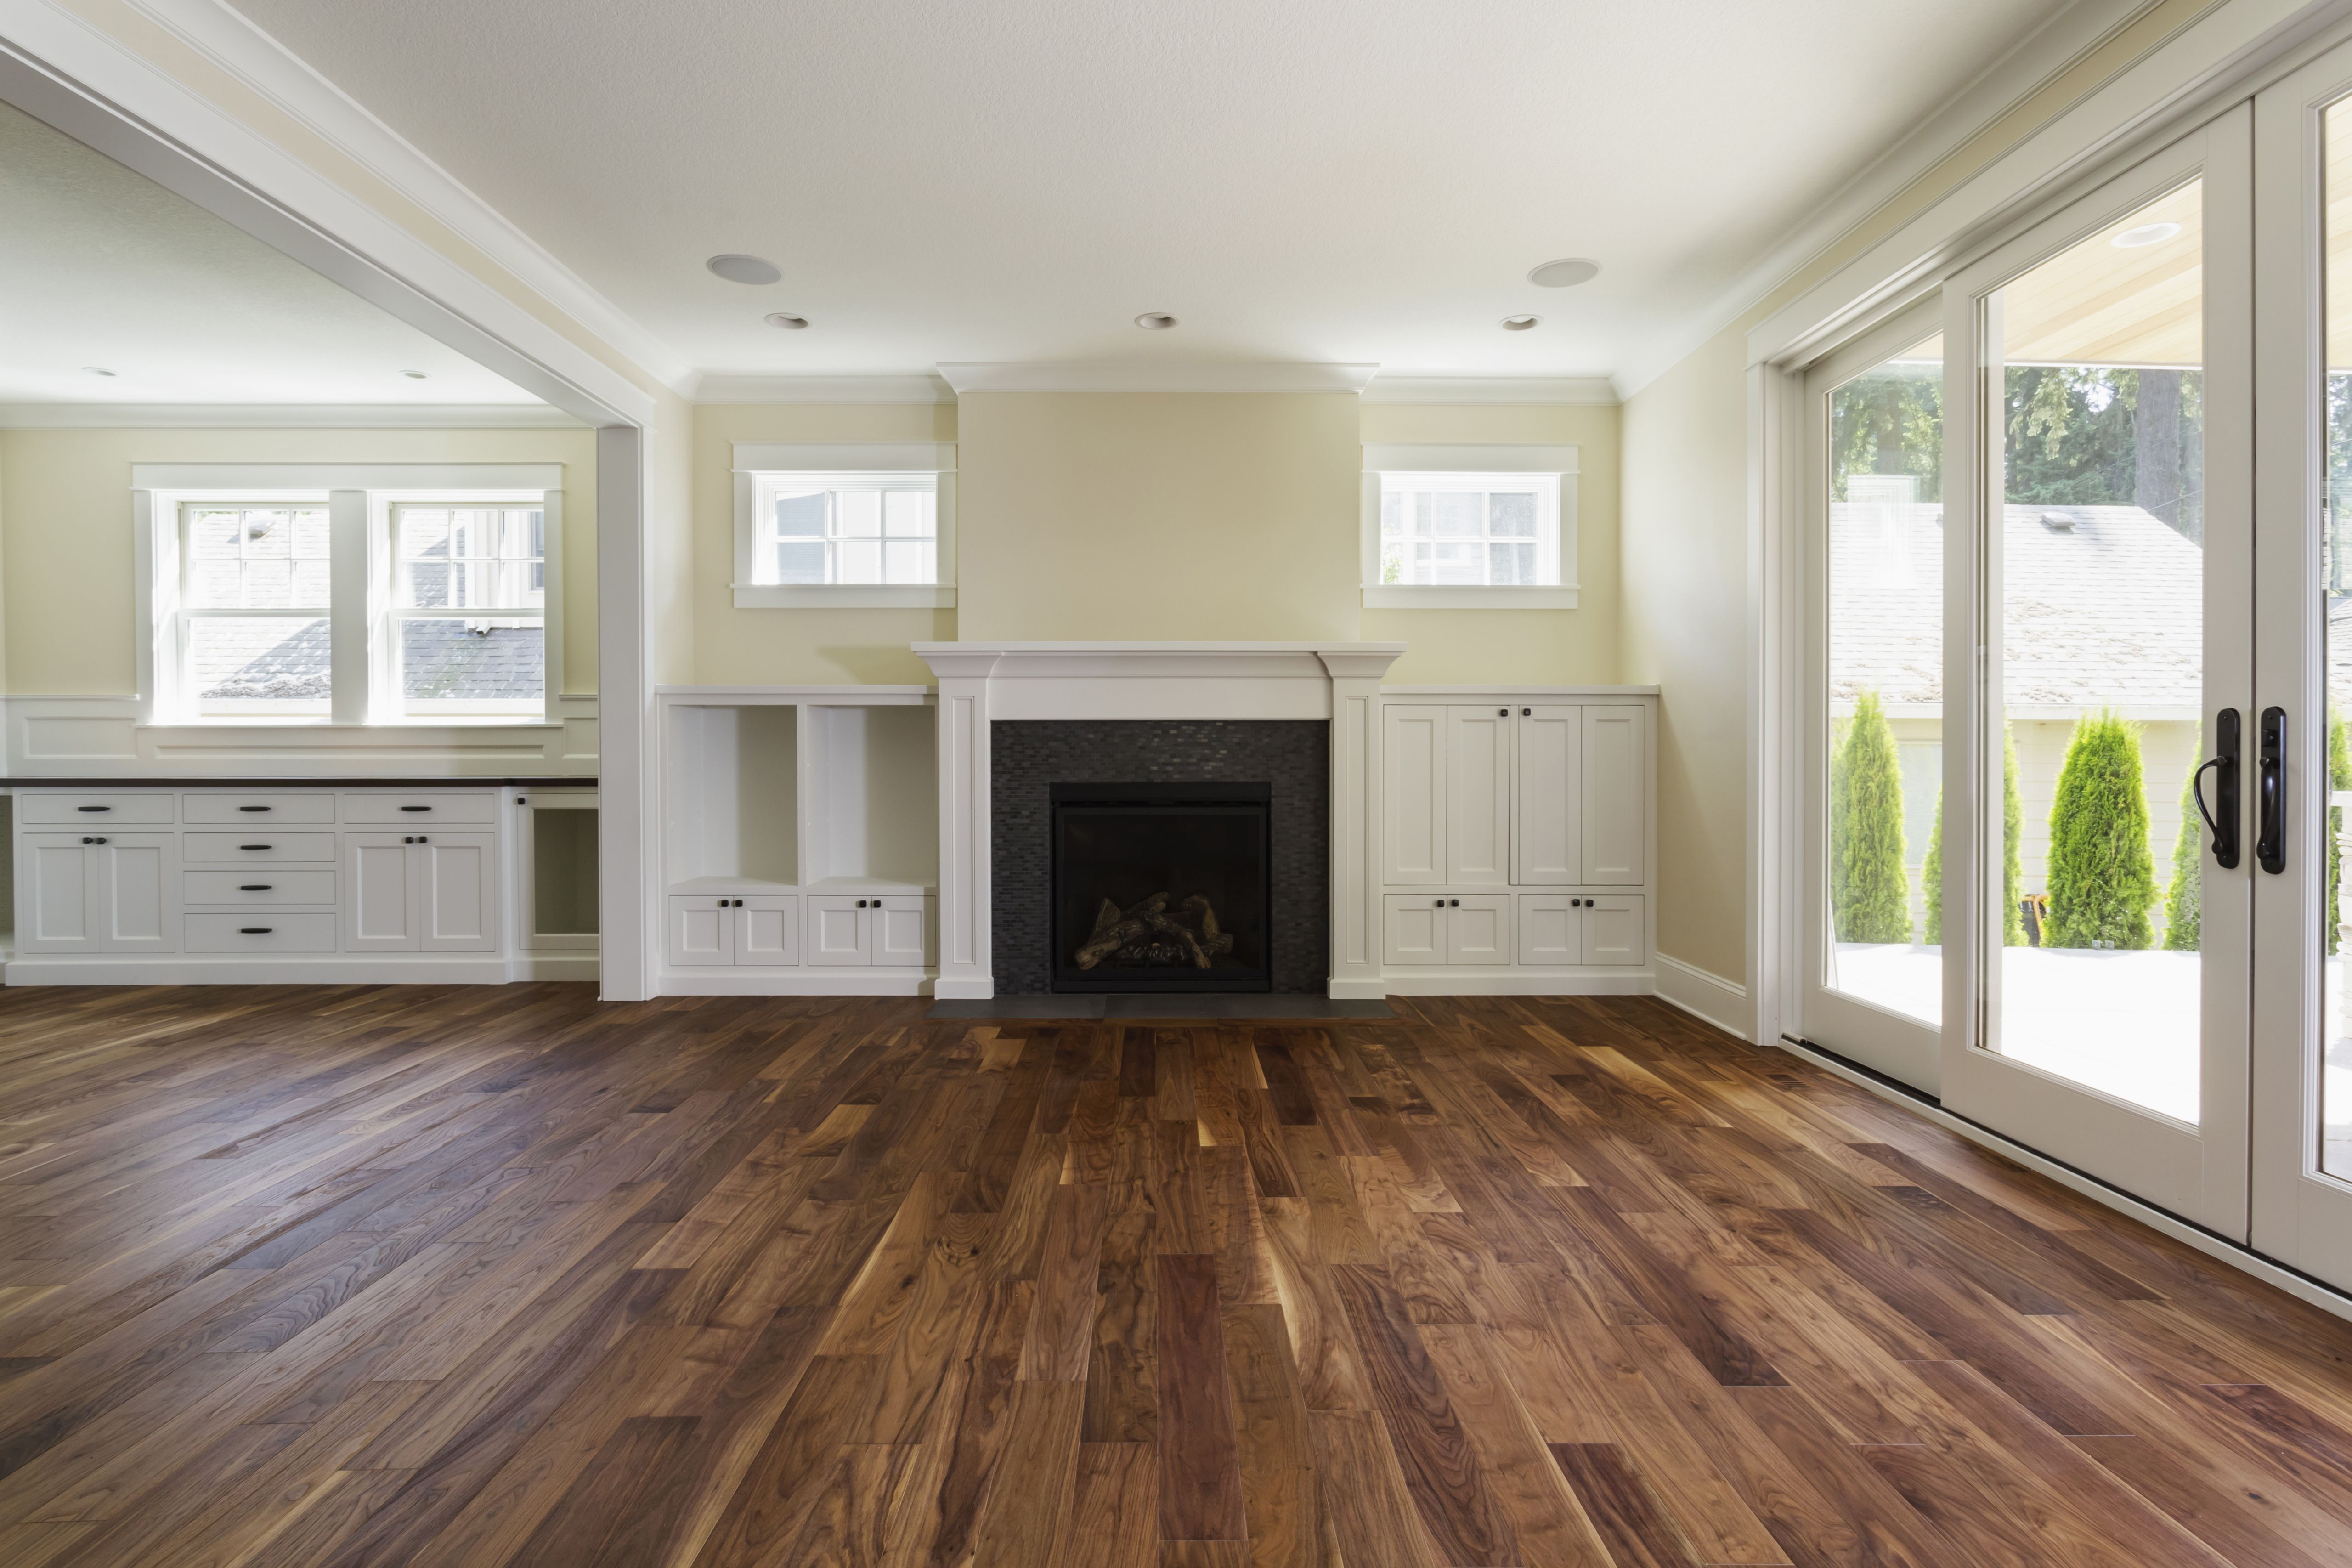 28 Ideal Hardwood Flooring Labor Cost 2024 free download hardwood flooring labor cost of the pros and cons of prefinished hardwood flooring pertaining to fireplace and built in shelves in living room 482143011 57bef8e33df78cc16e035397